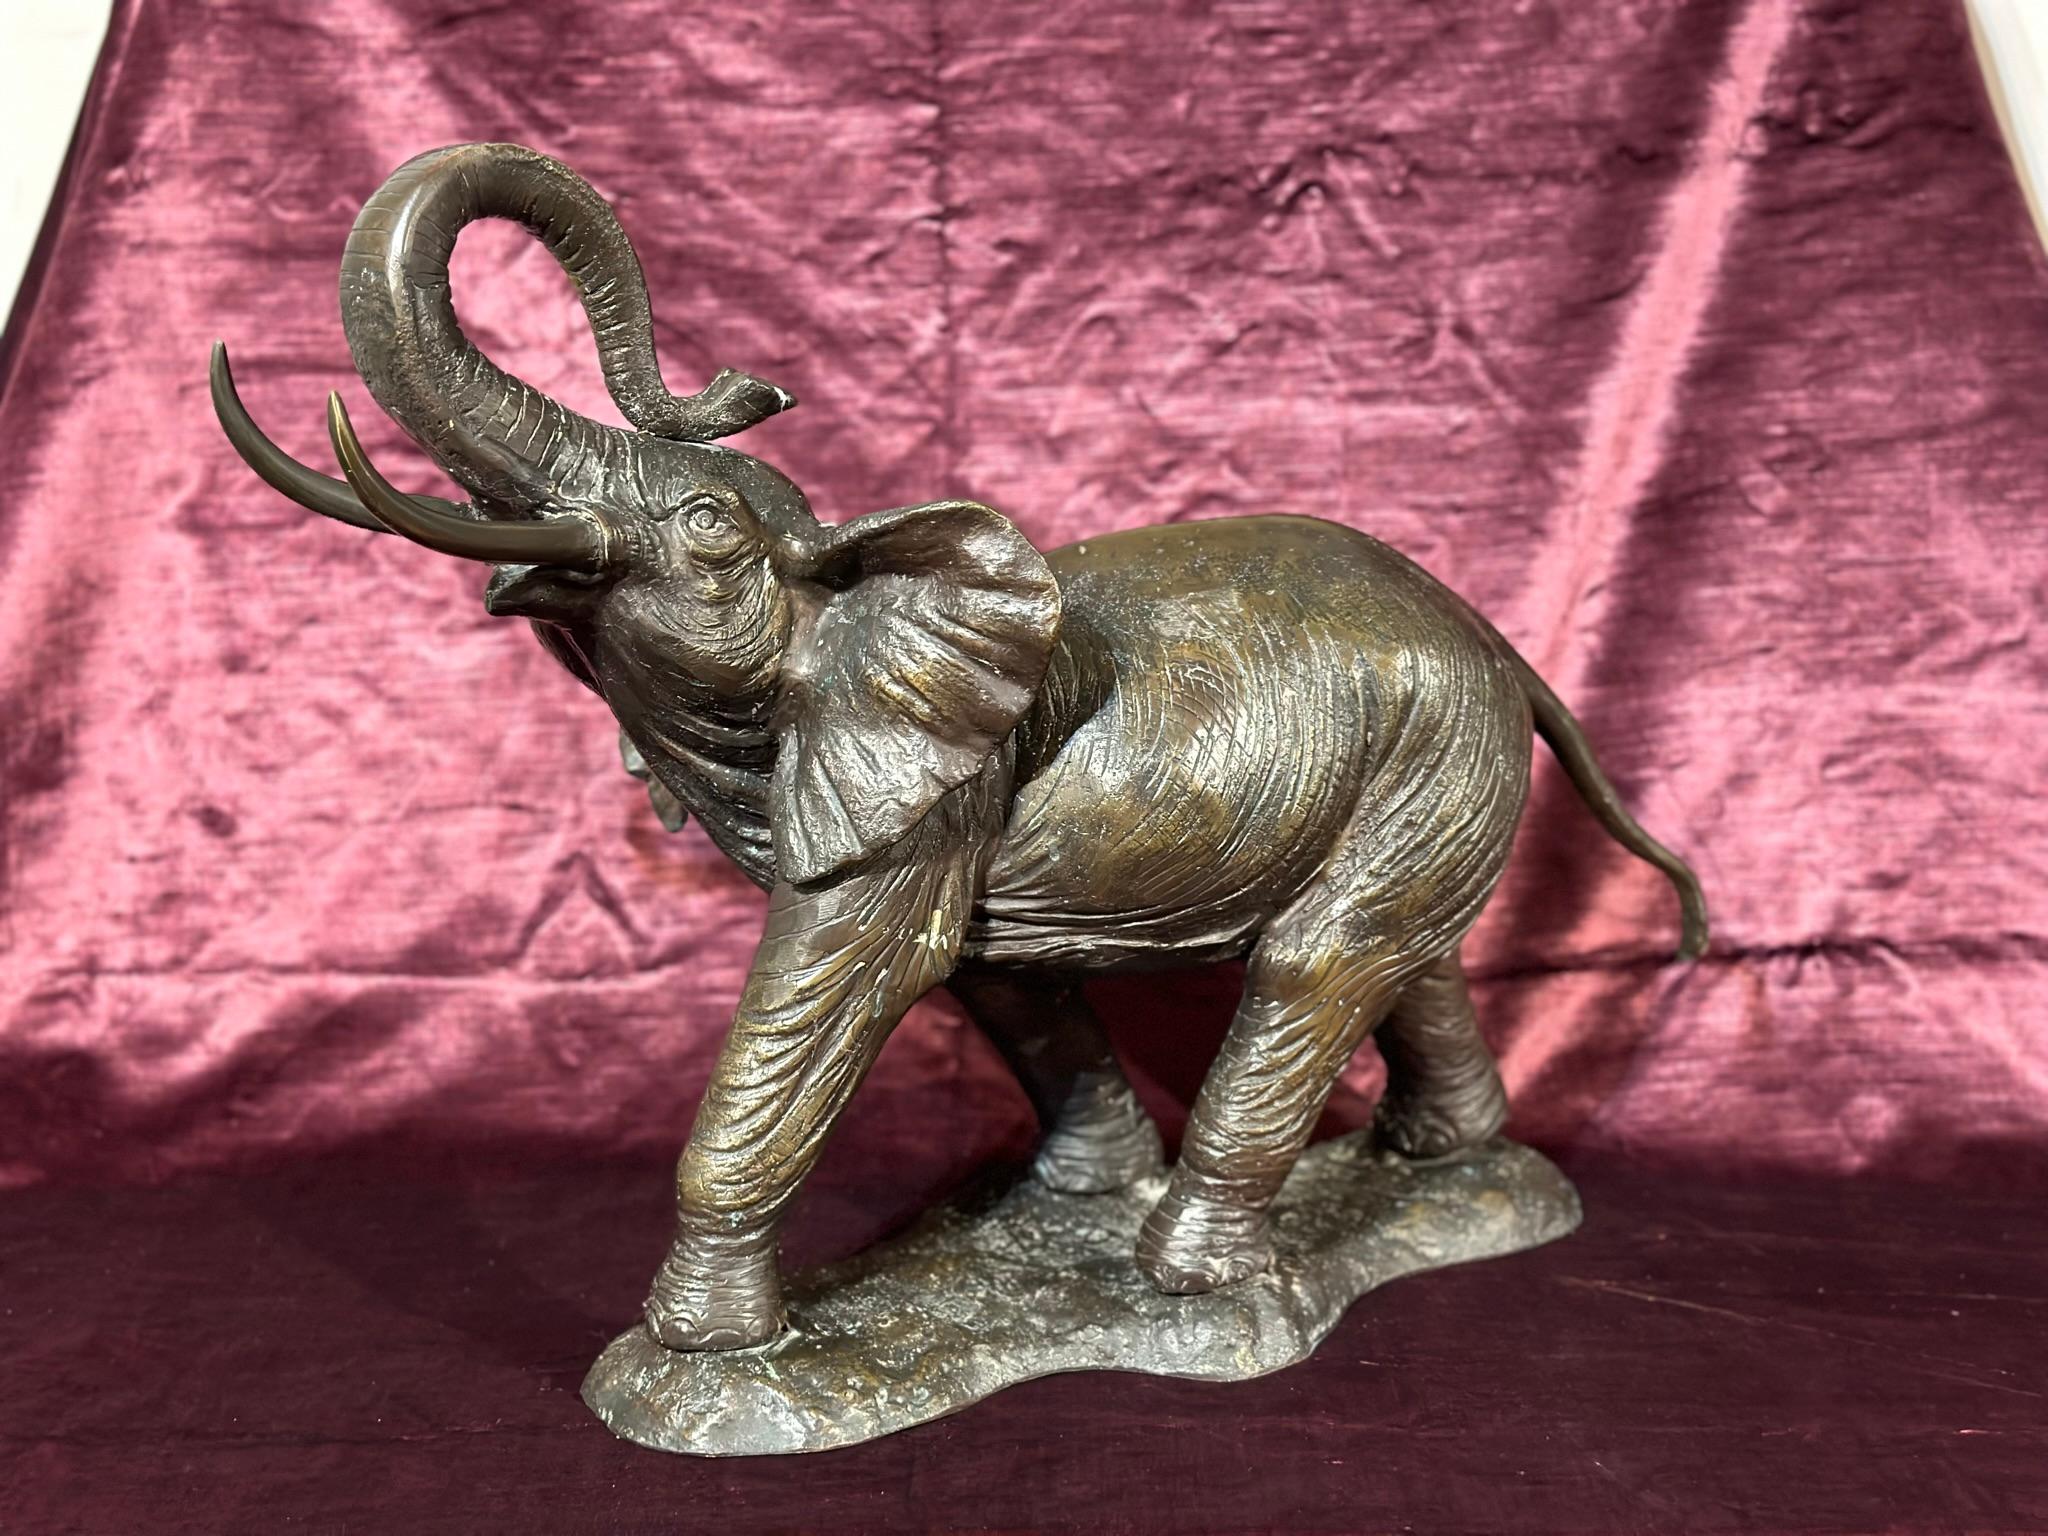 Large bronze sculpture depicting an elephant with raised trunk. Typical Tuscan foundry manufacture from the early 1900s. Burnished investment casting.

Measurements: HxWxD 45 x 56 x 23 cm